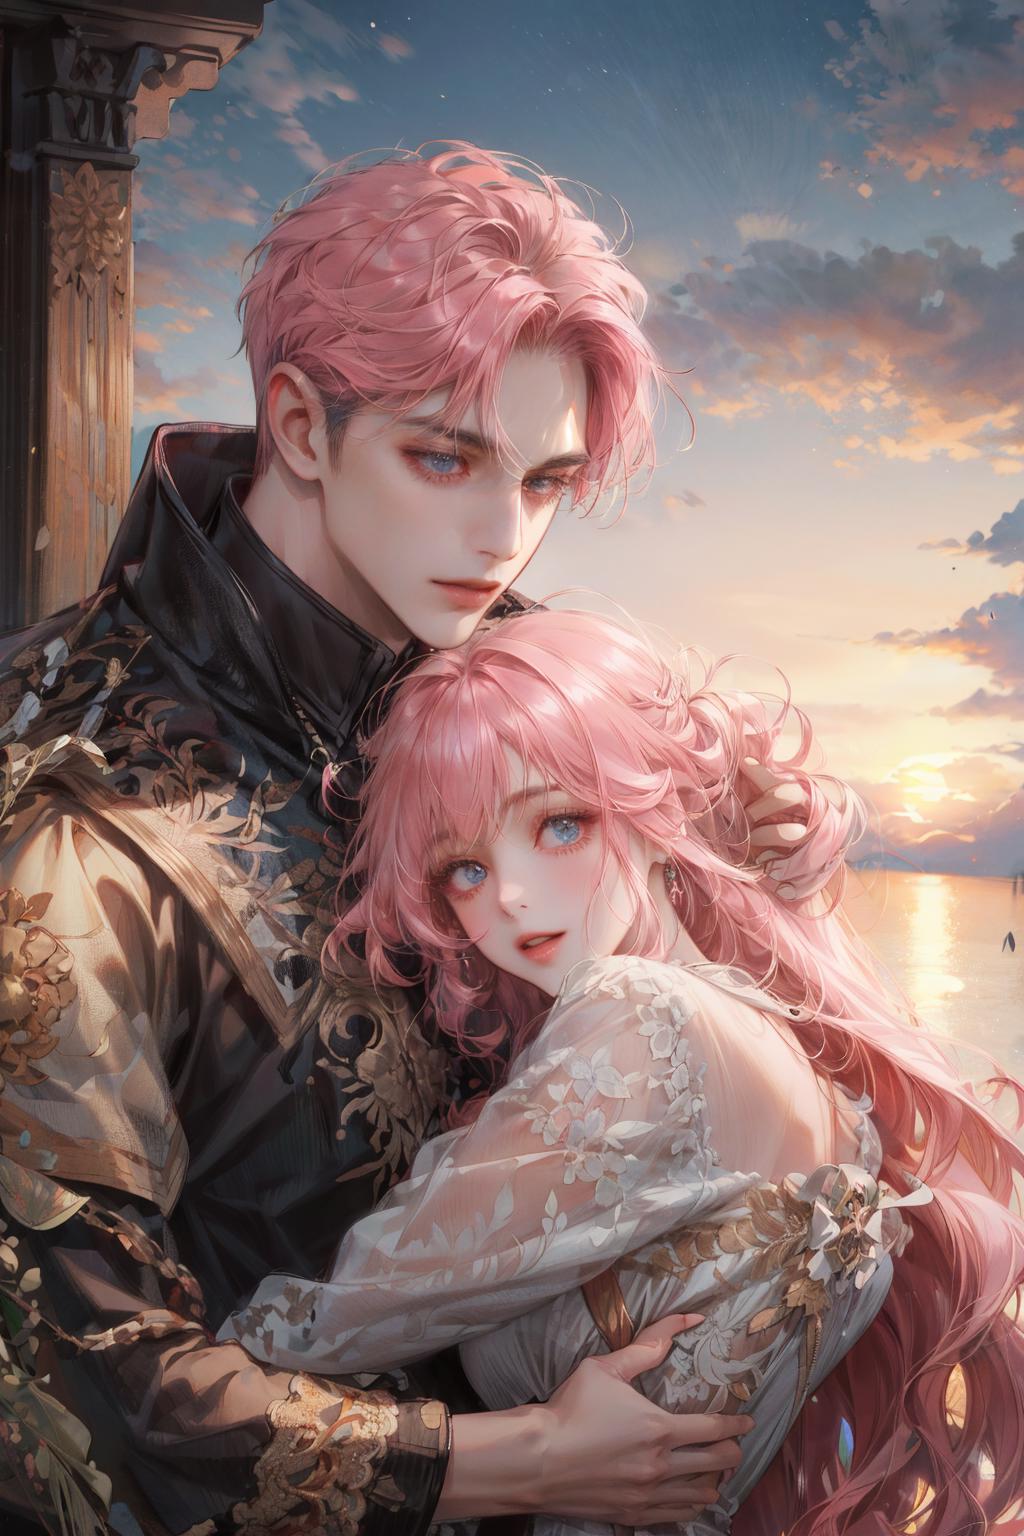 RomanticPrism image by commoii